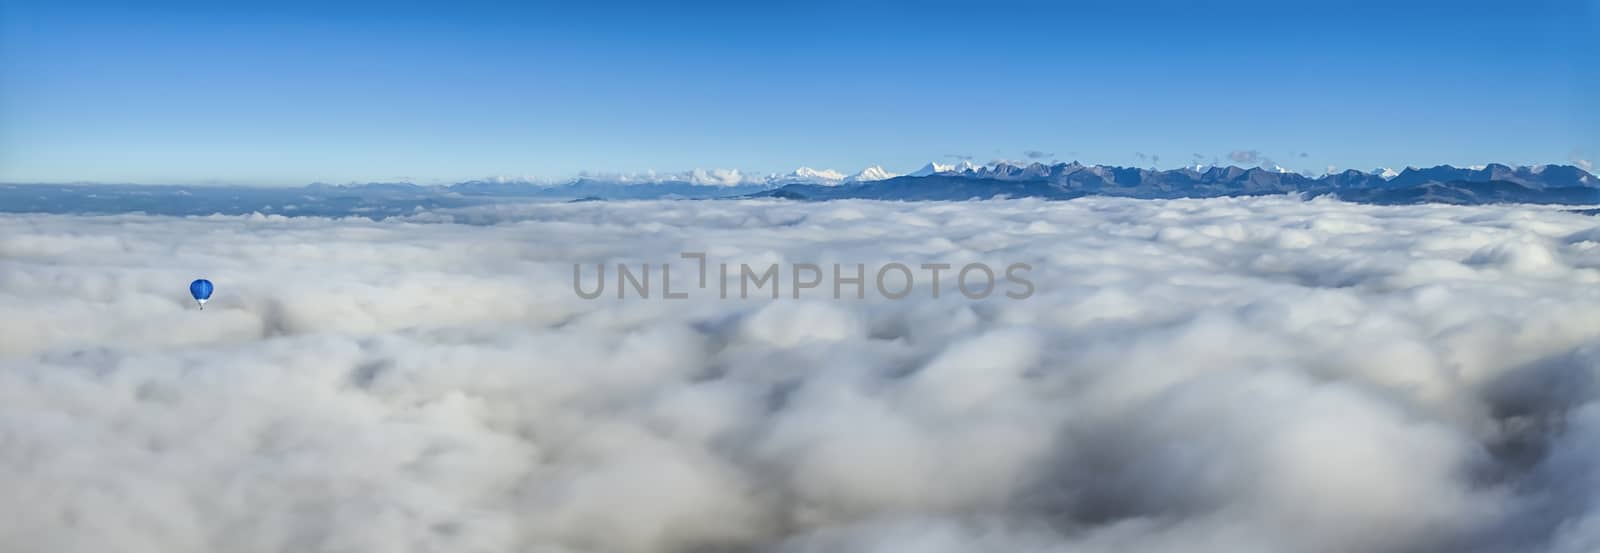 Hot air balloon upon clouds seeing Alps mountains range and deep blue sky, Switzerland